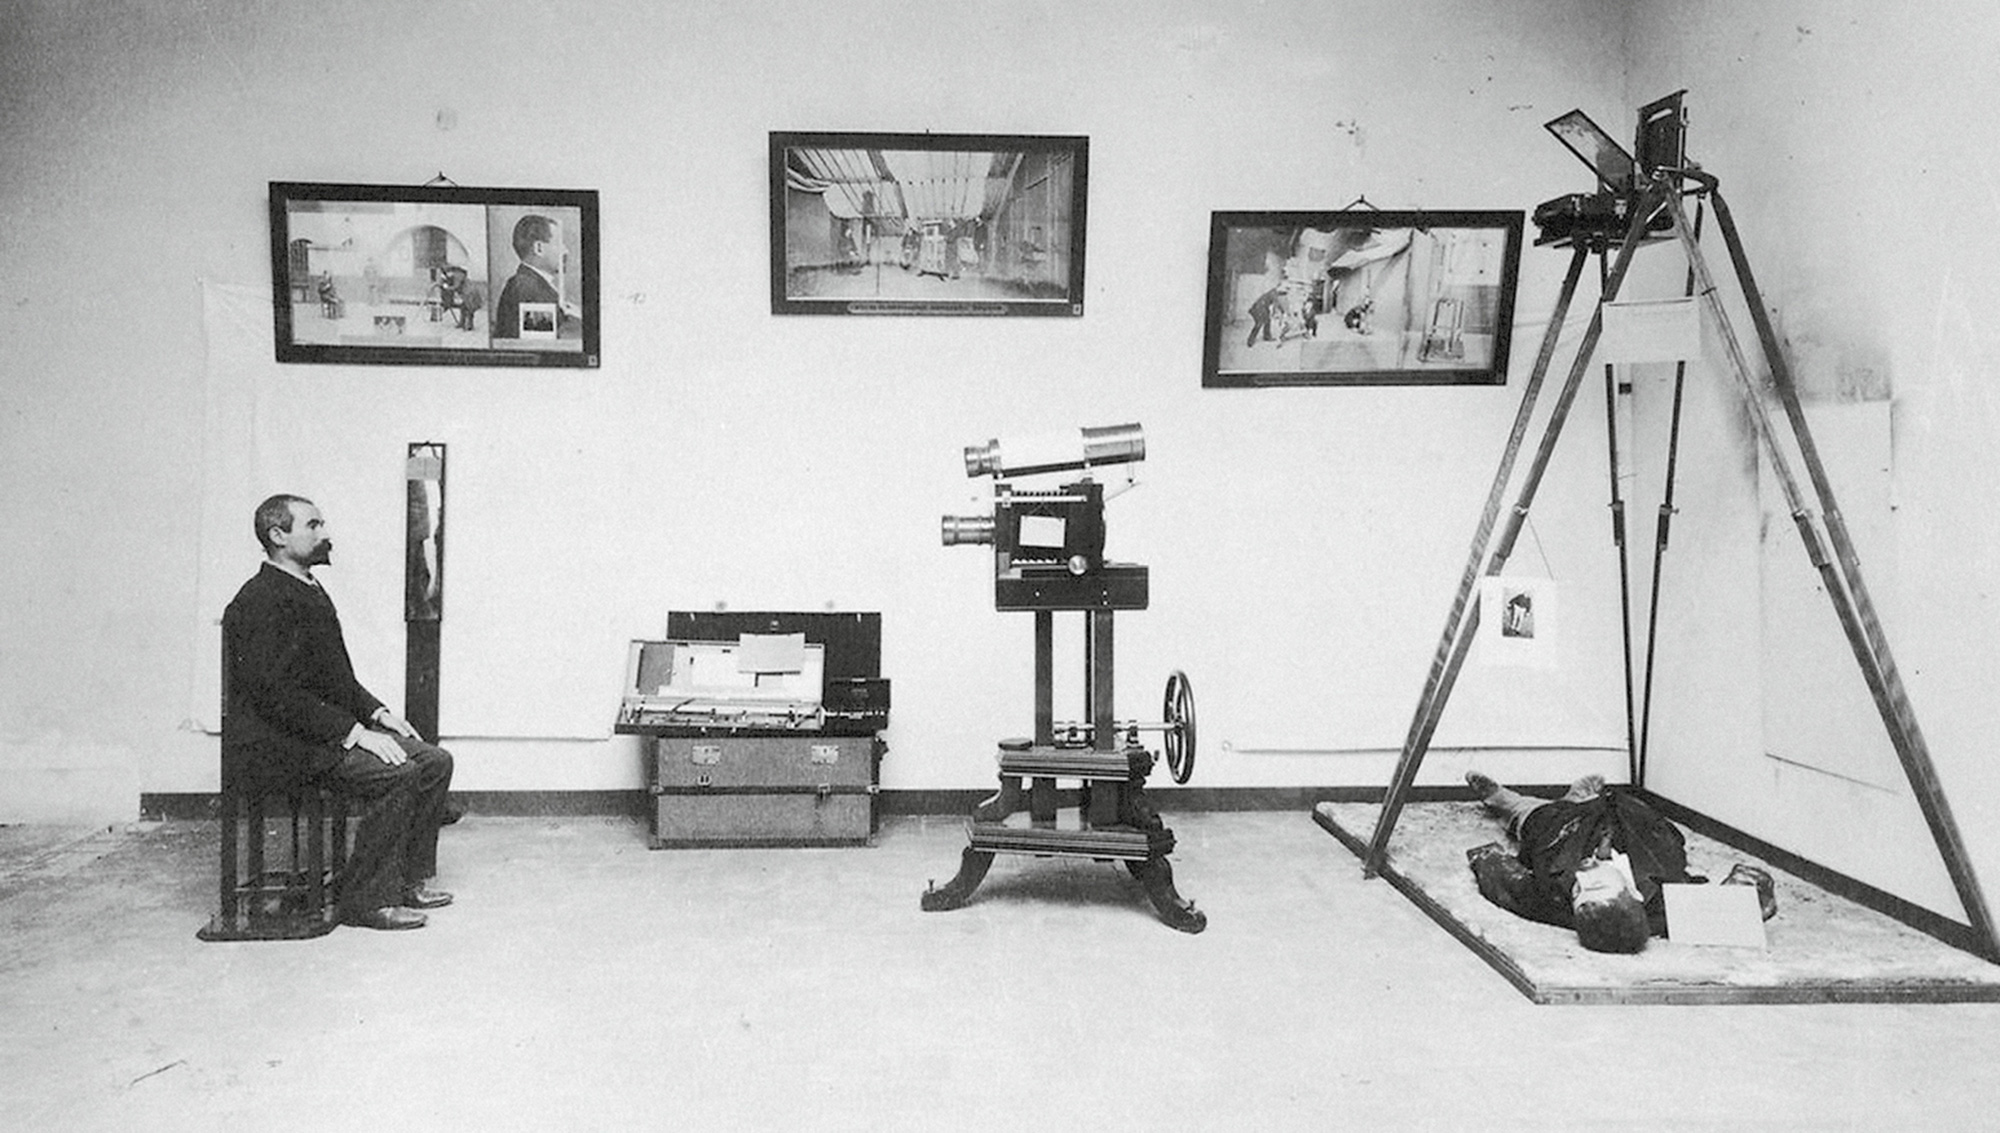 A video image from Alphonse Bertillon’s photographic album of his exhibition at the eighteen ninety-three World’s Columbian Exposition in Chicago.